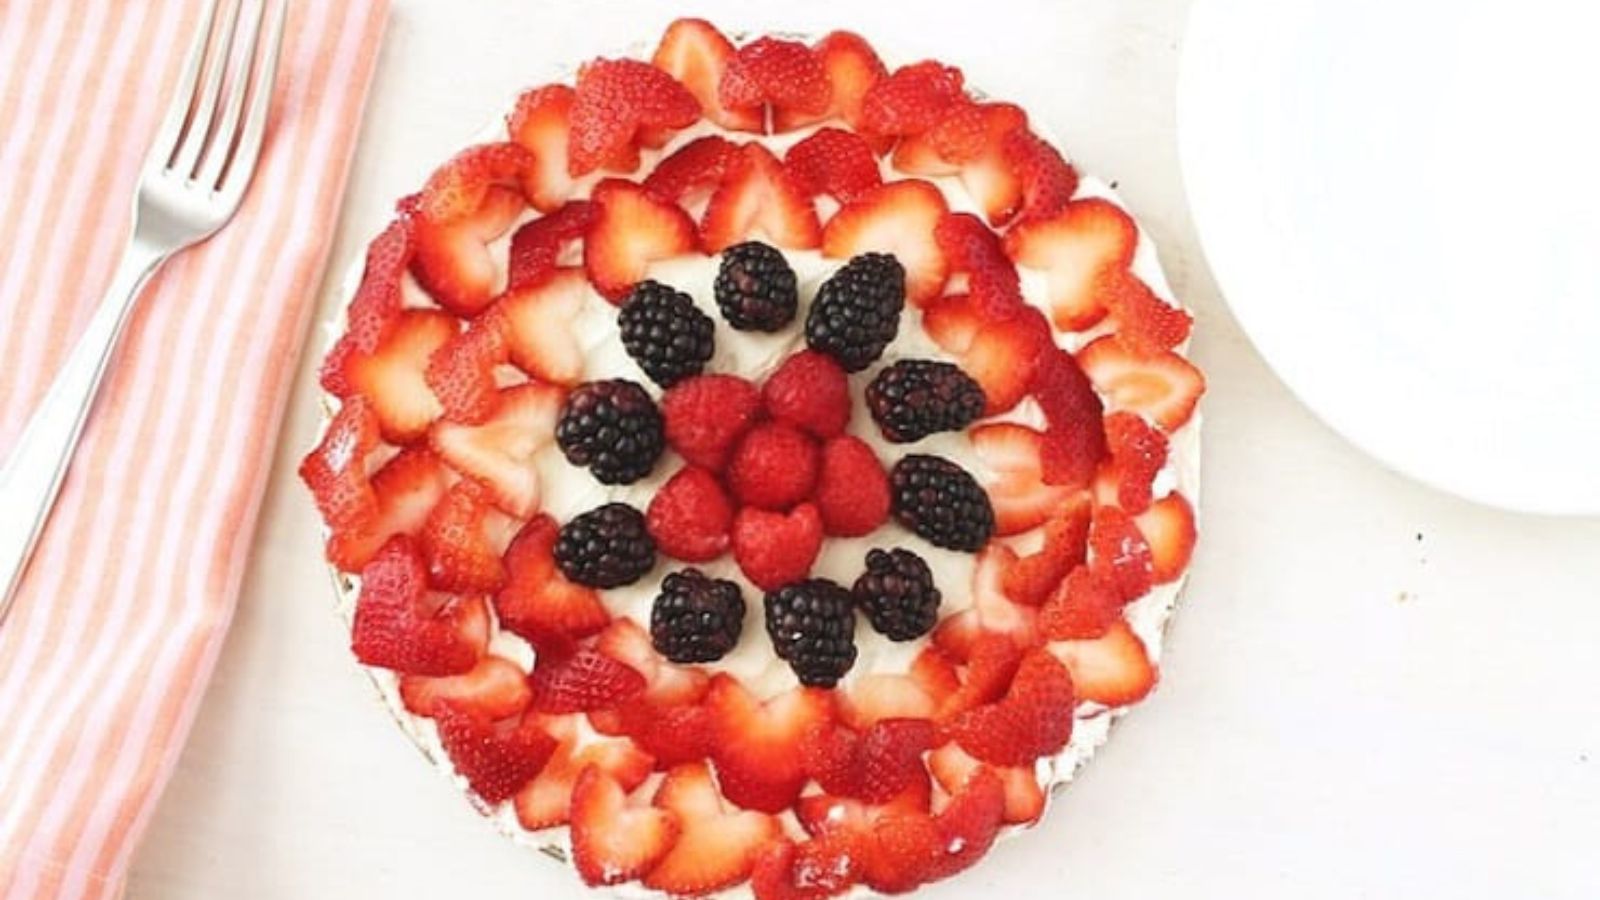 Summer Bliss: 21 Refreshing No-Bake Delights to Beat the Heat